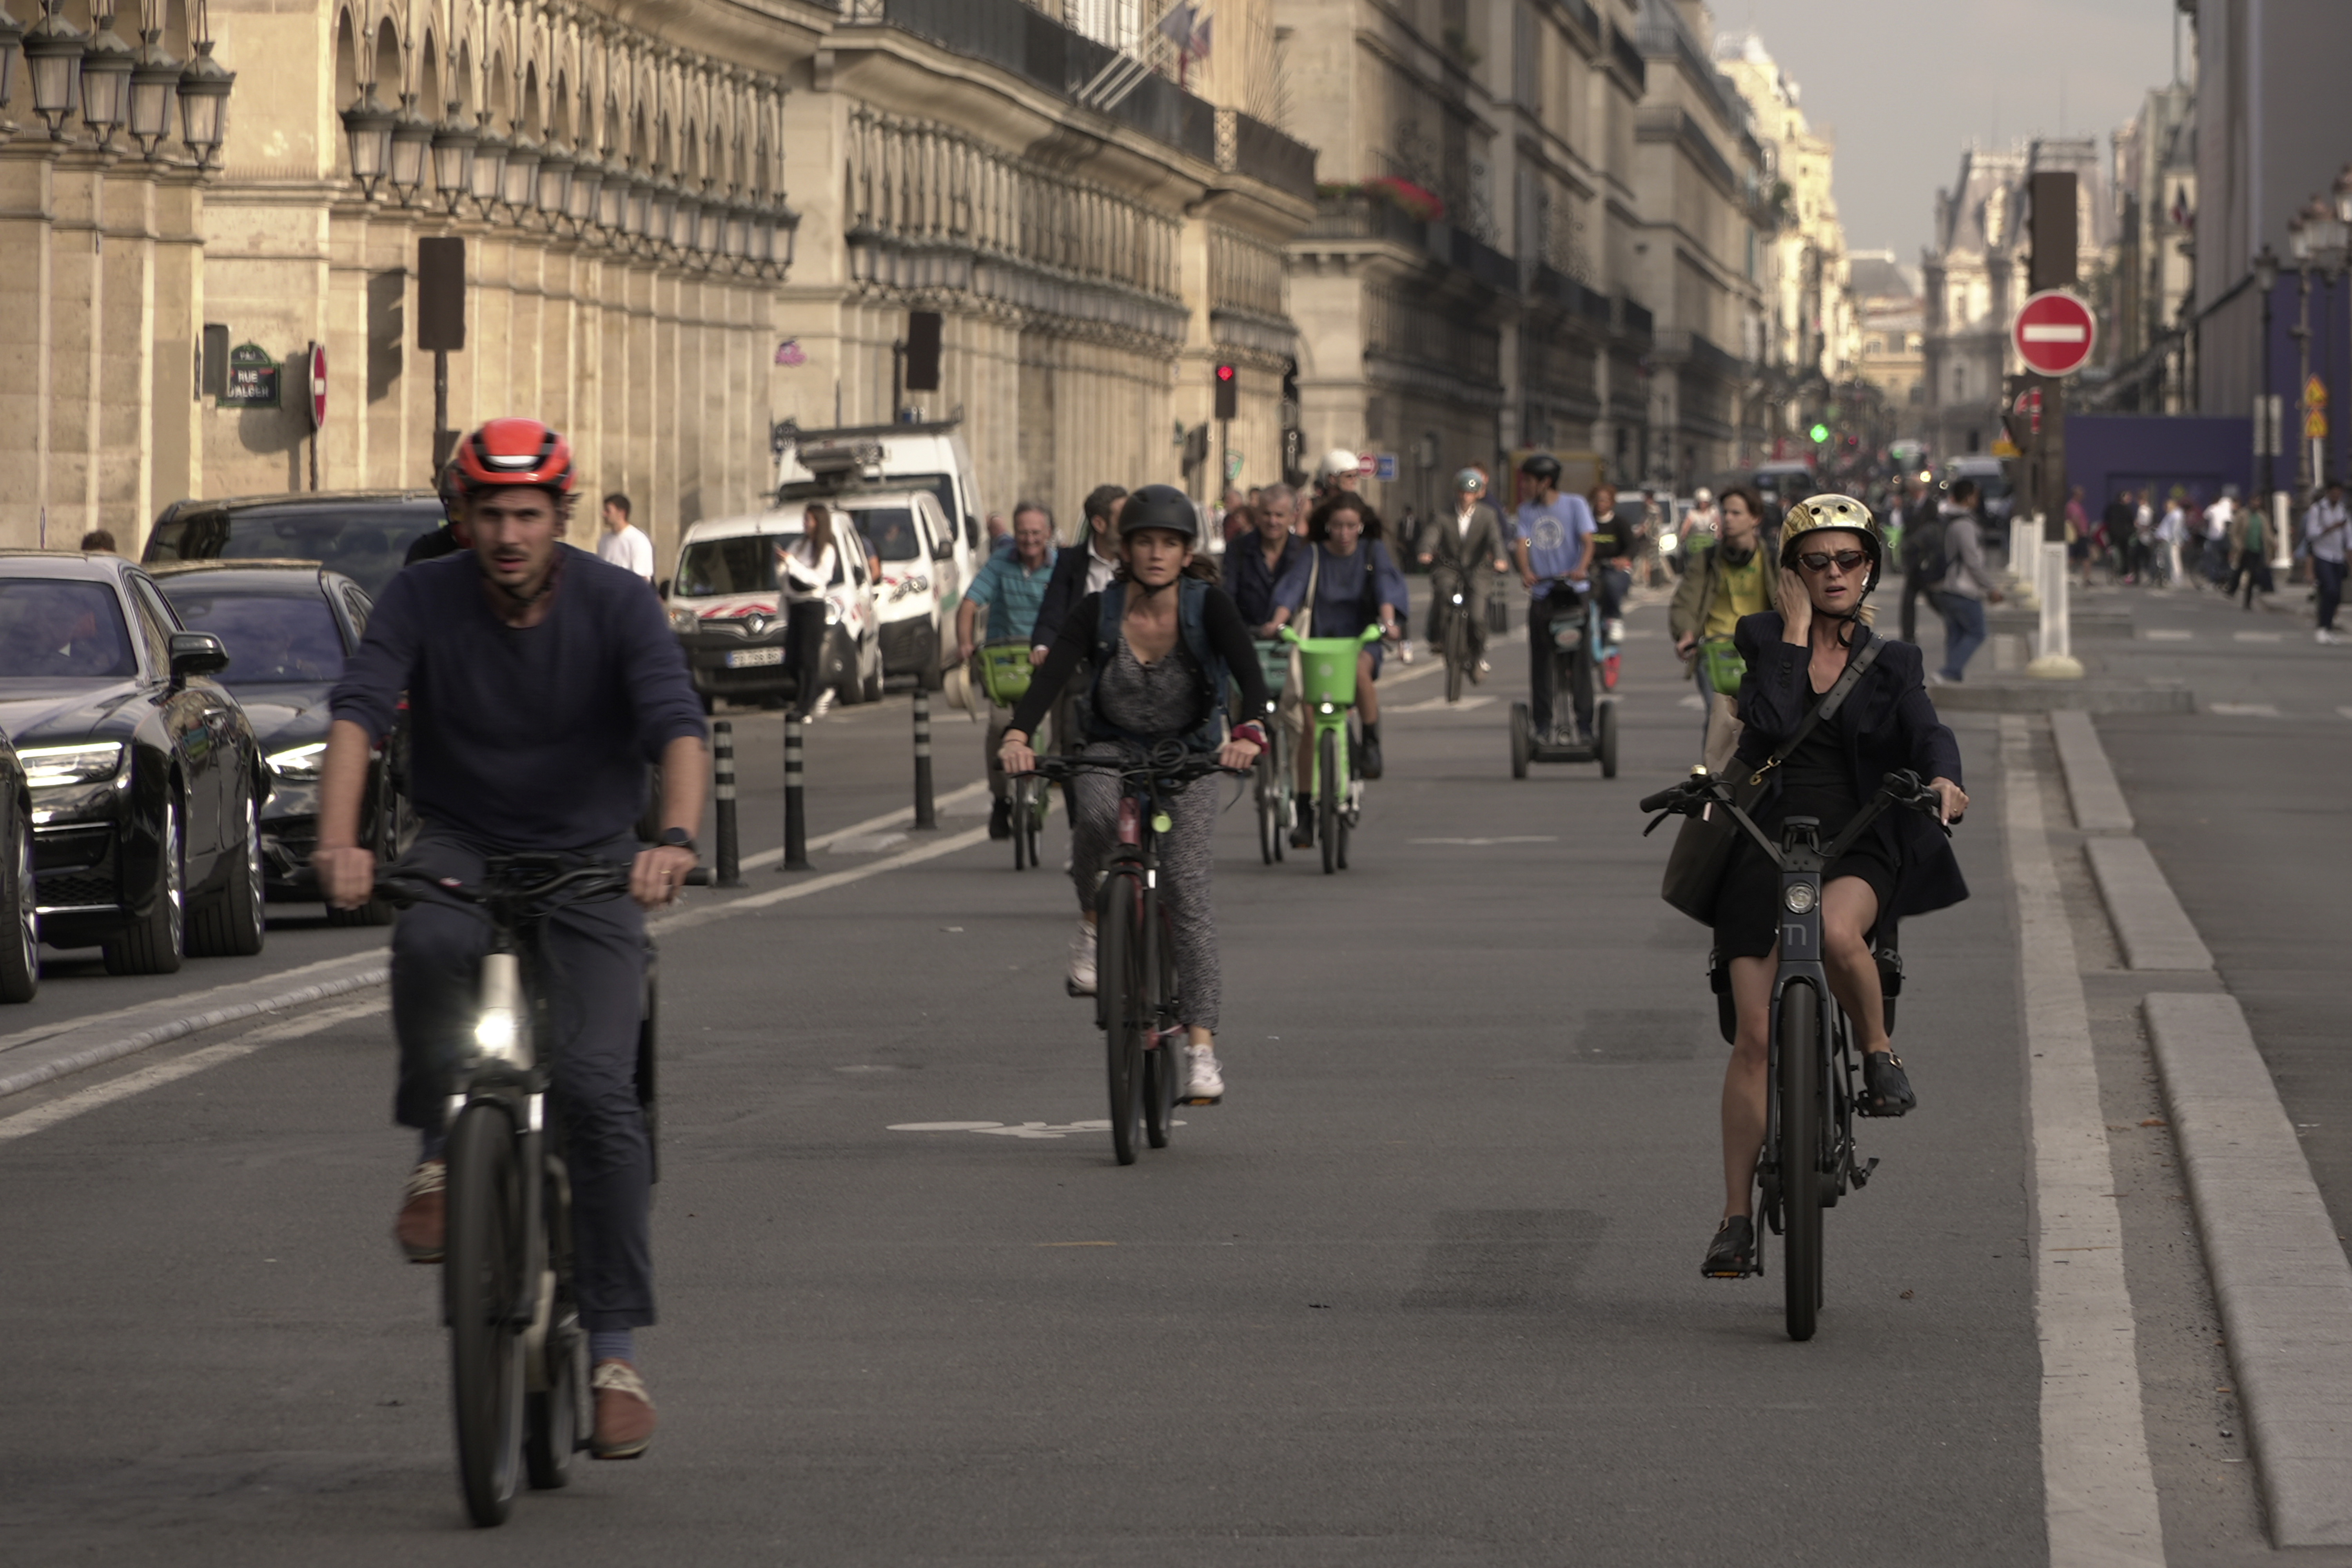 Study says cyclists should make themselves seen - but reflective